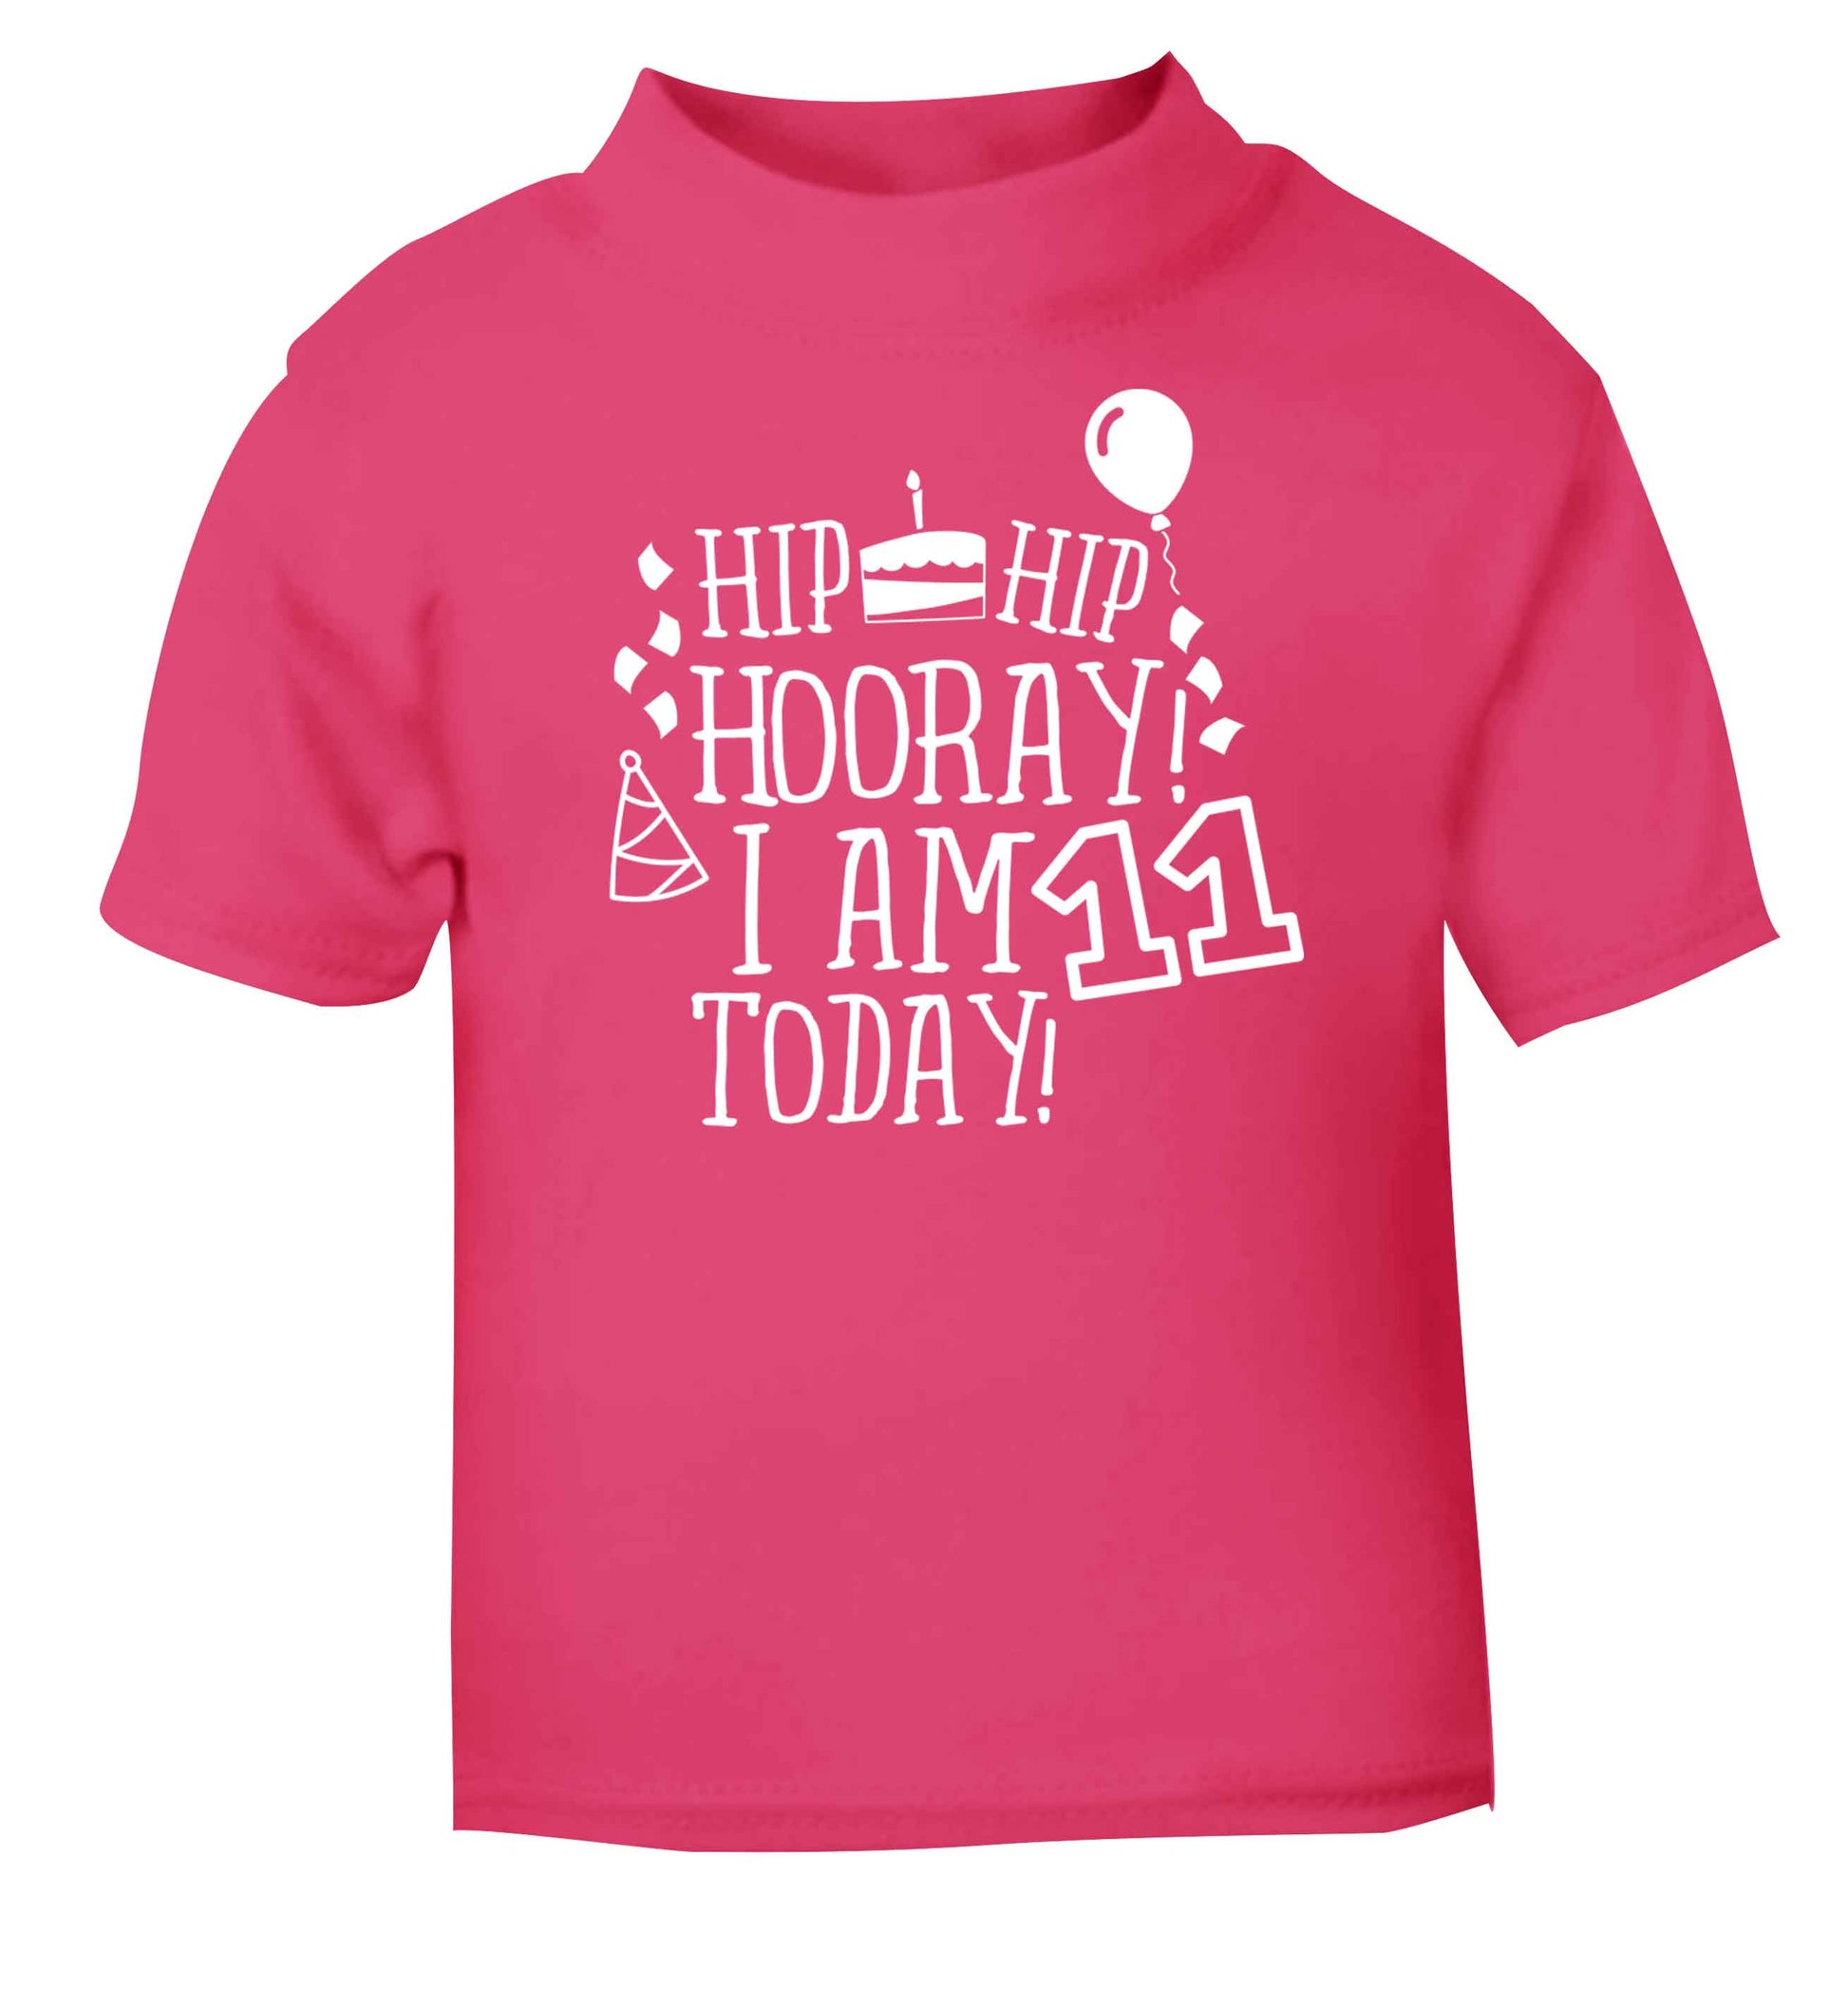 Hip hip hooray I am eleven today! pink baby toddler Tshirt 2 Years